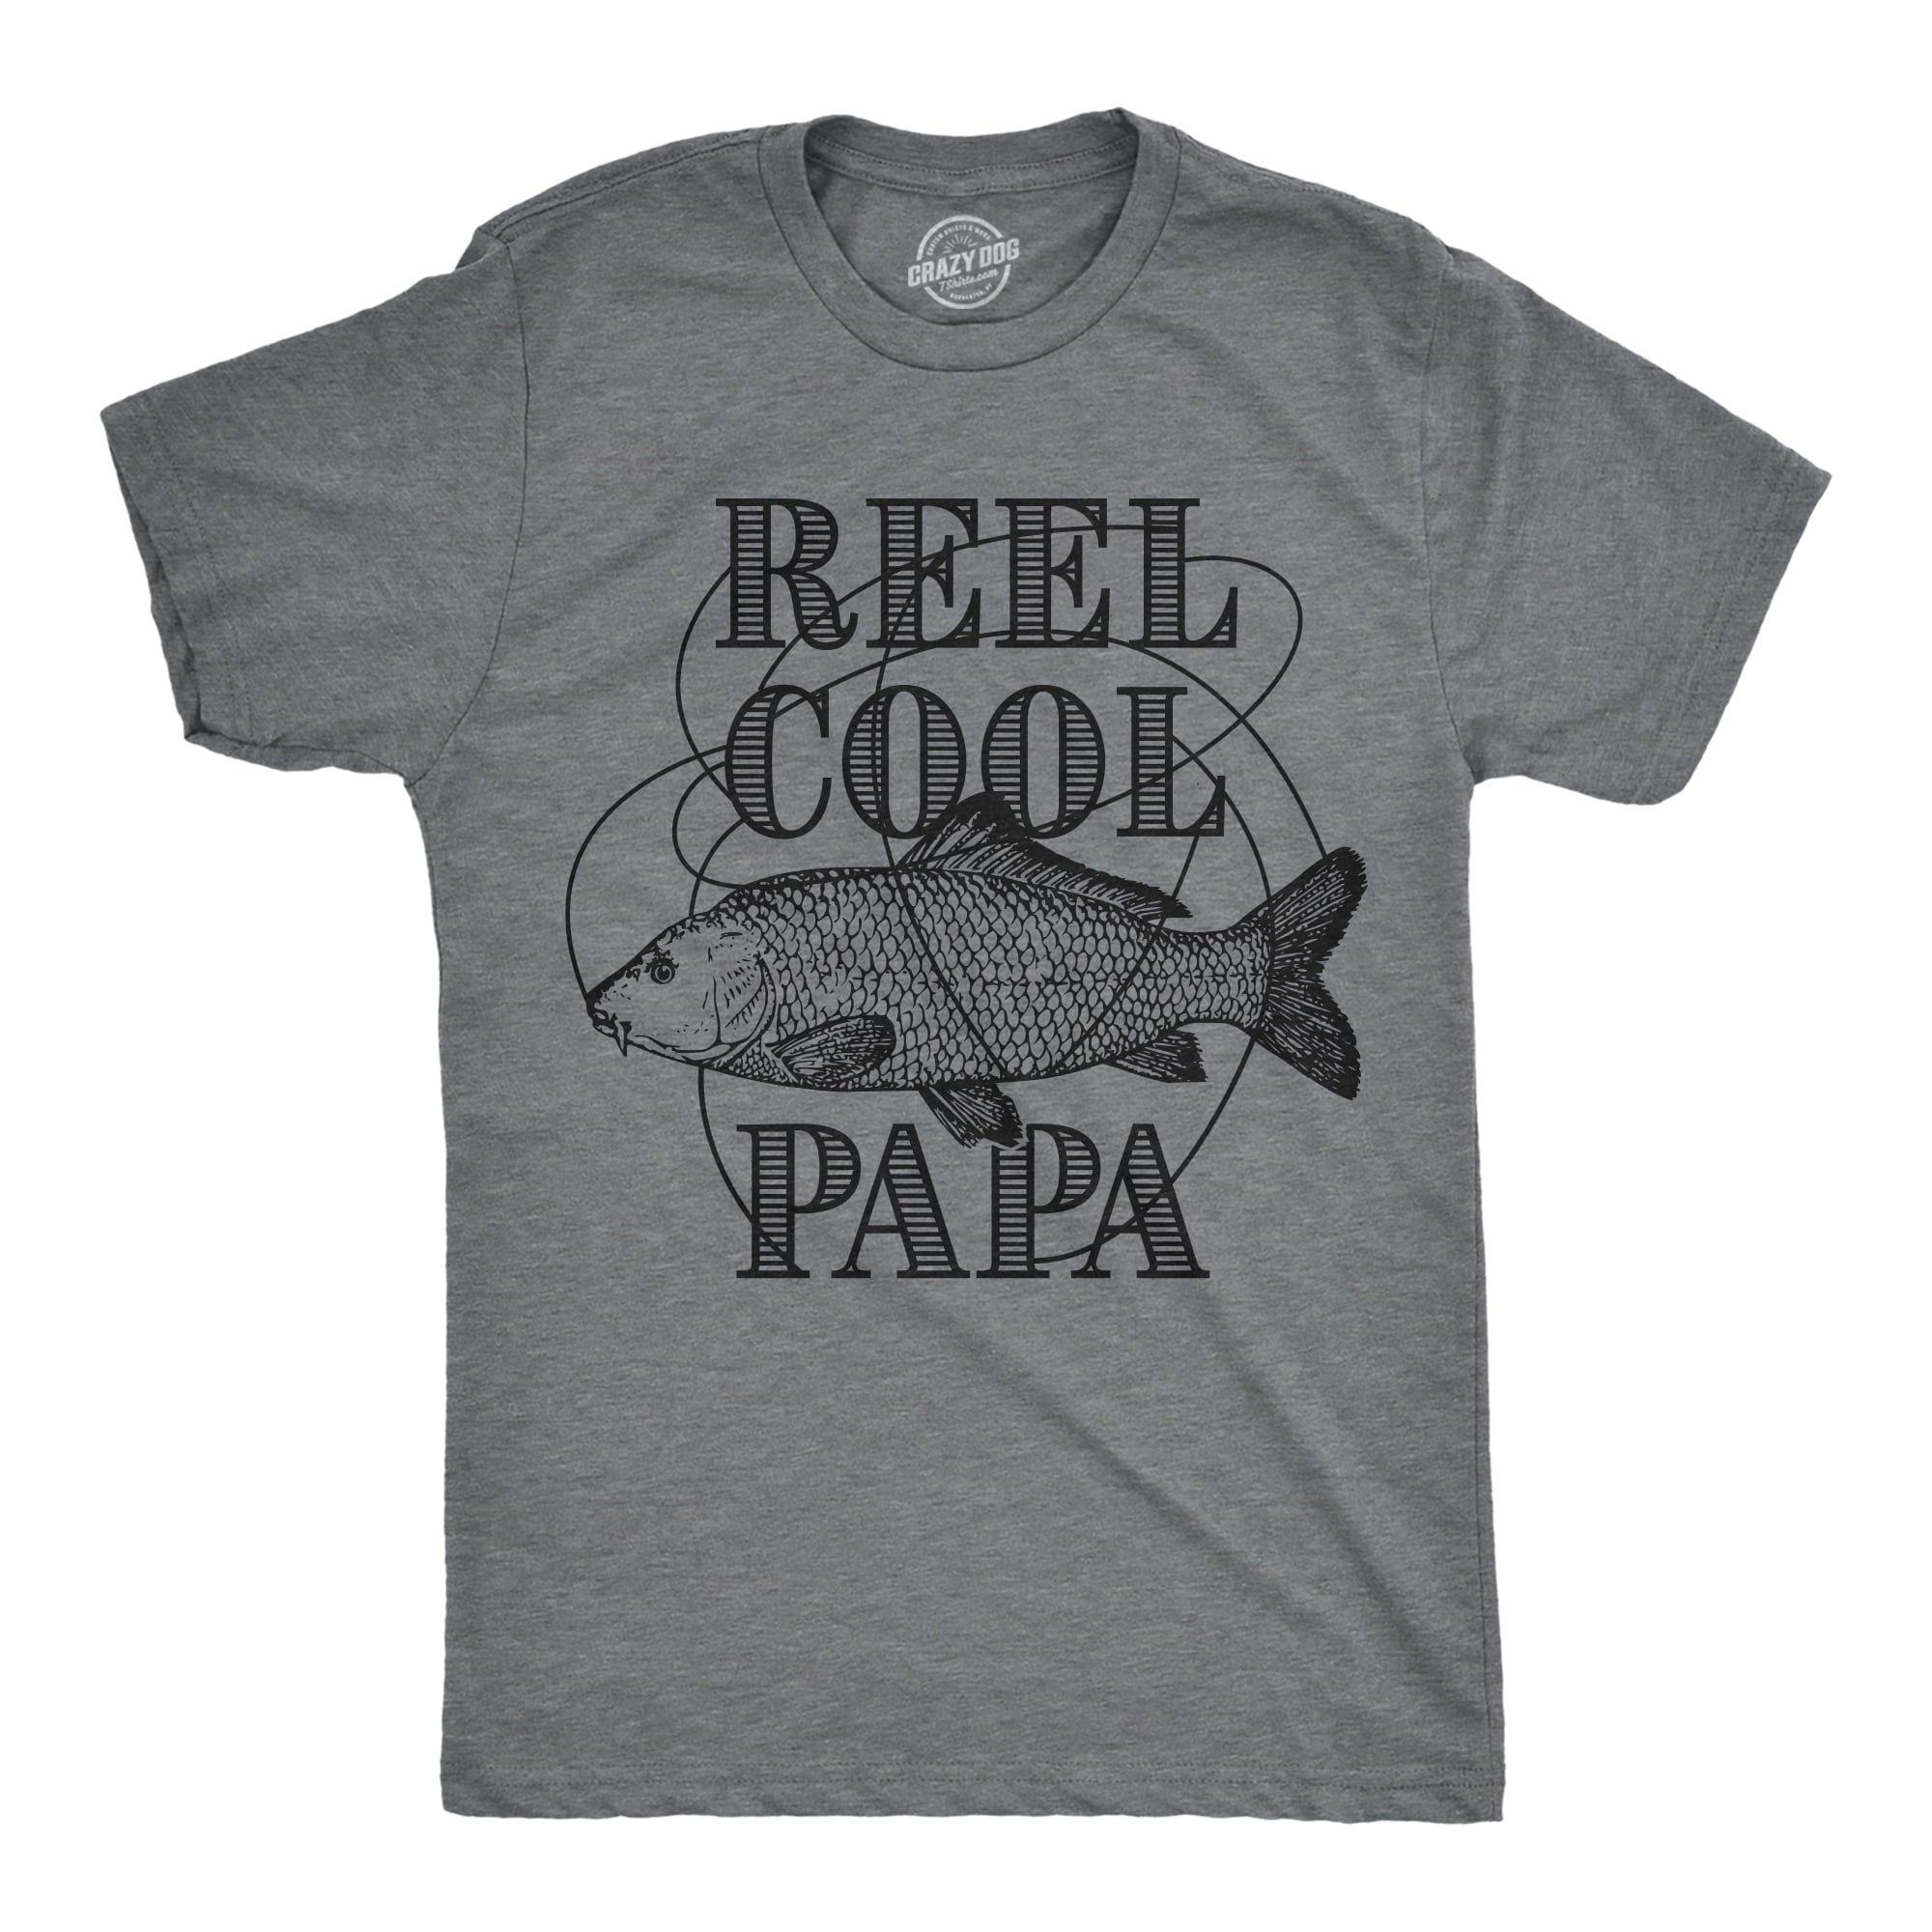 Mens Reel Cool Dad T shirt Funny Fathers Day Fishing Gift for